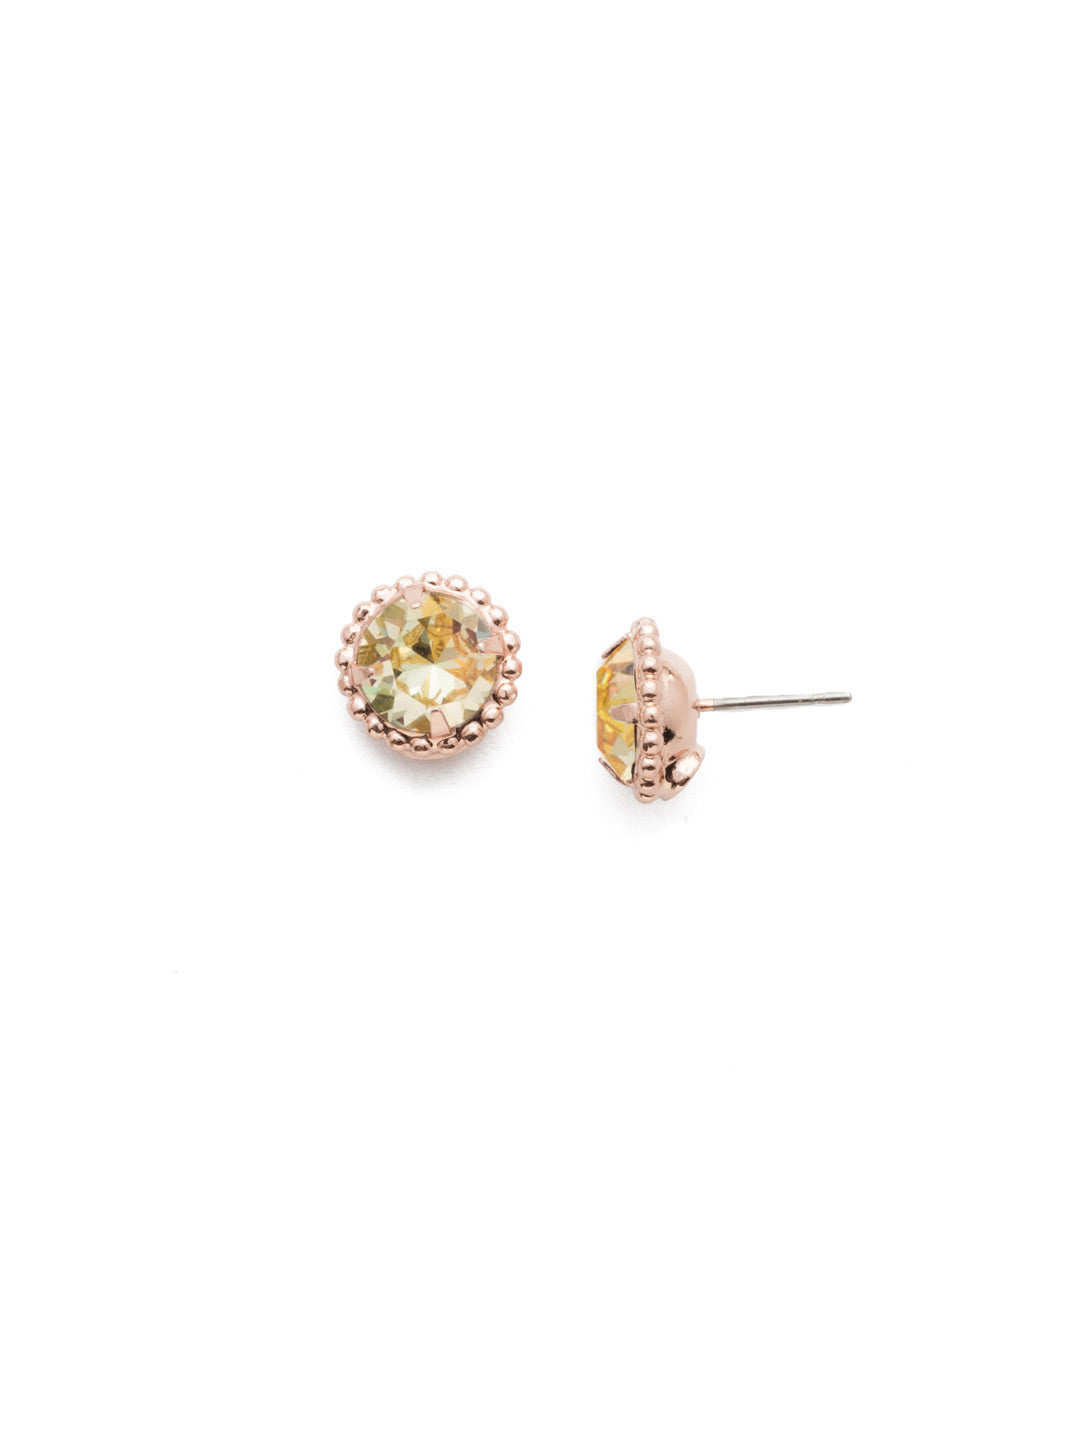 Simplicity Stud Earring - EBY38RGCCH